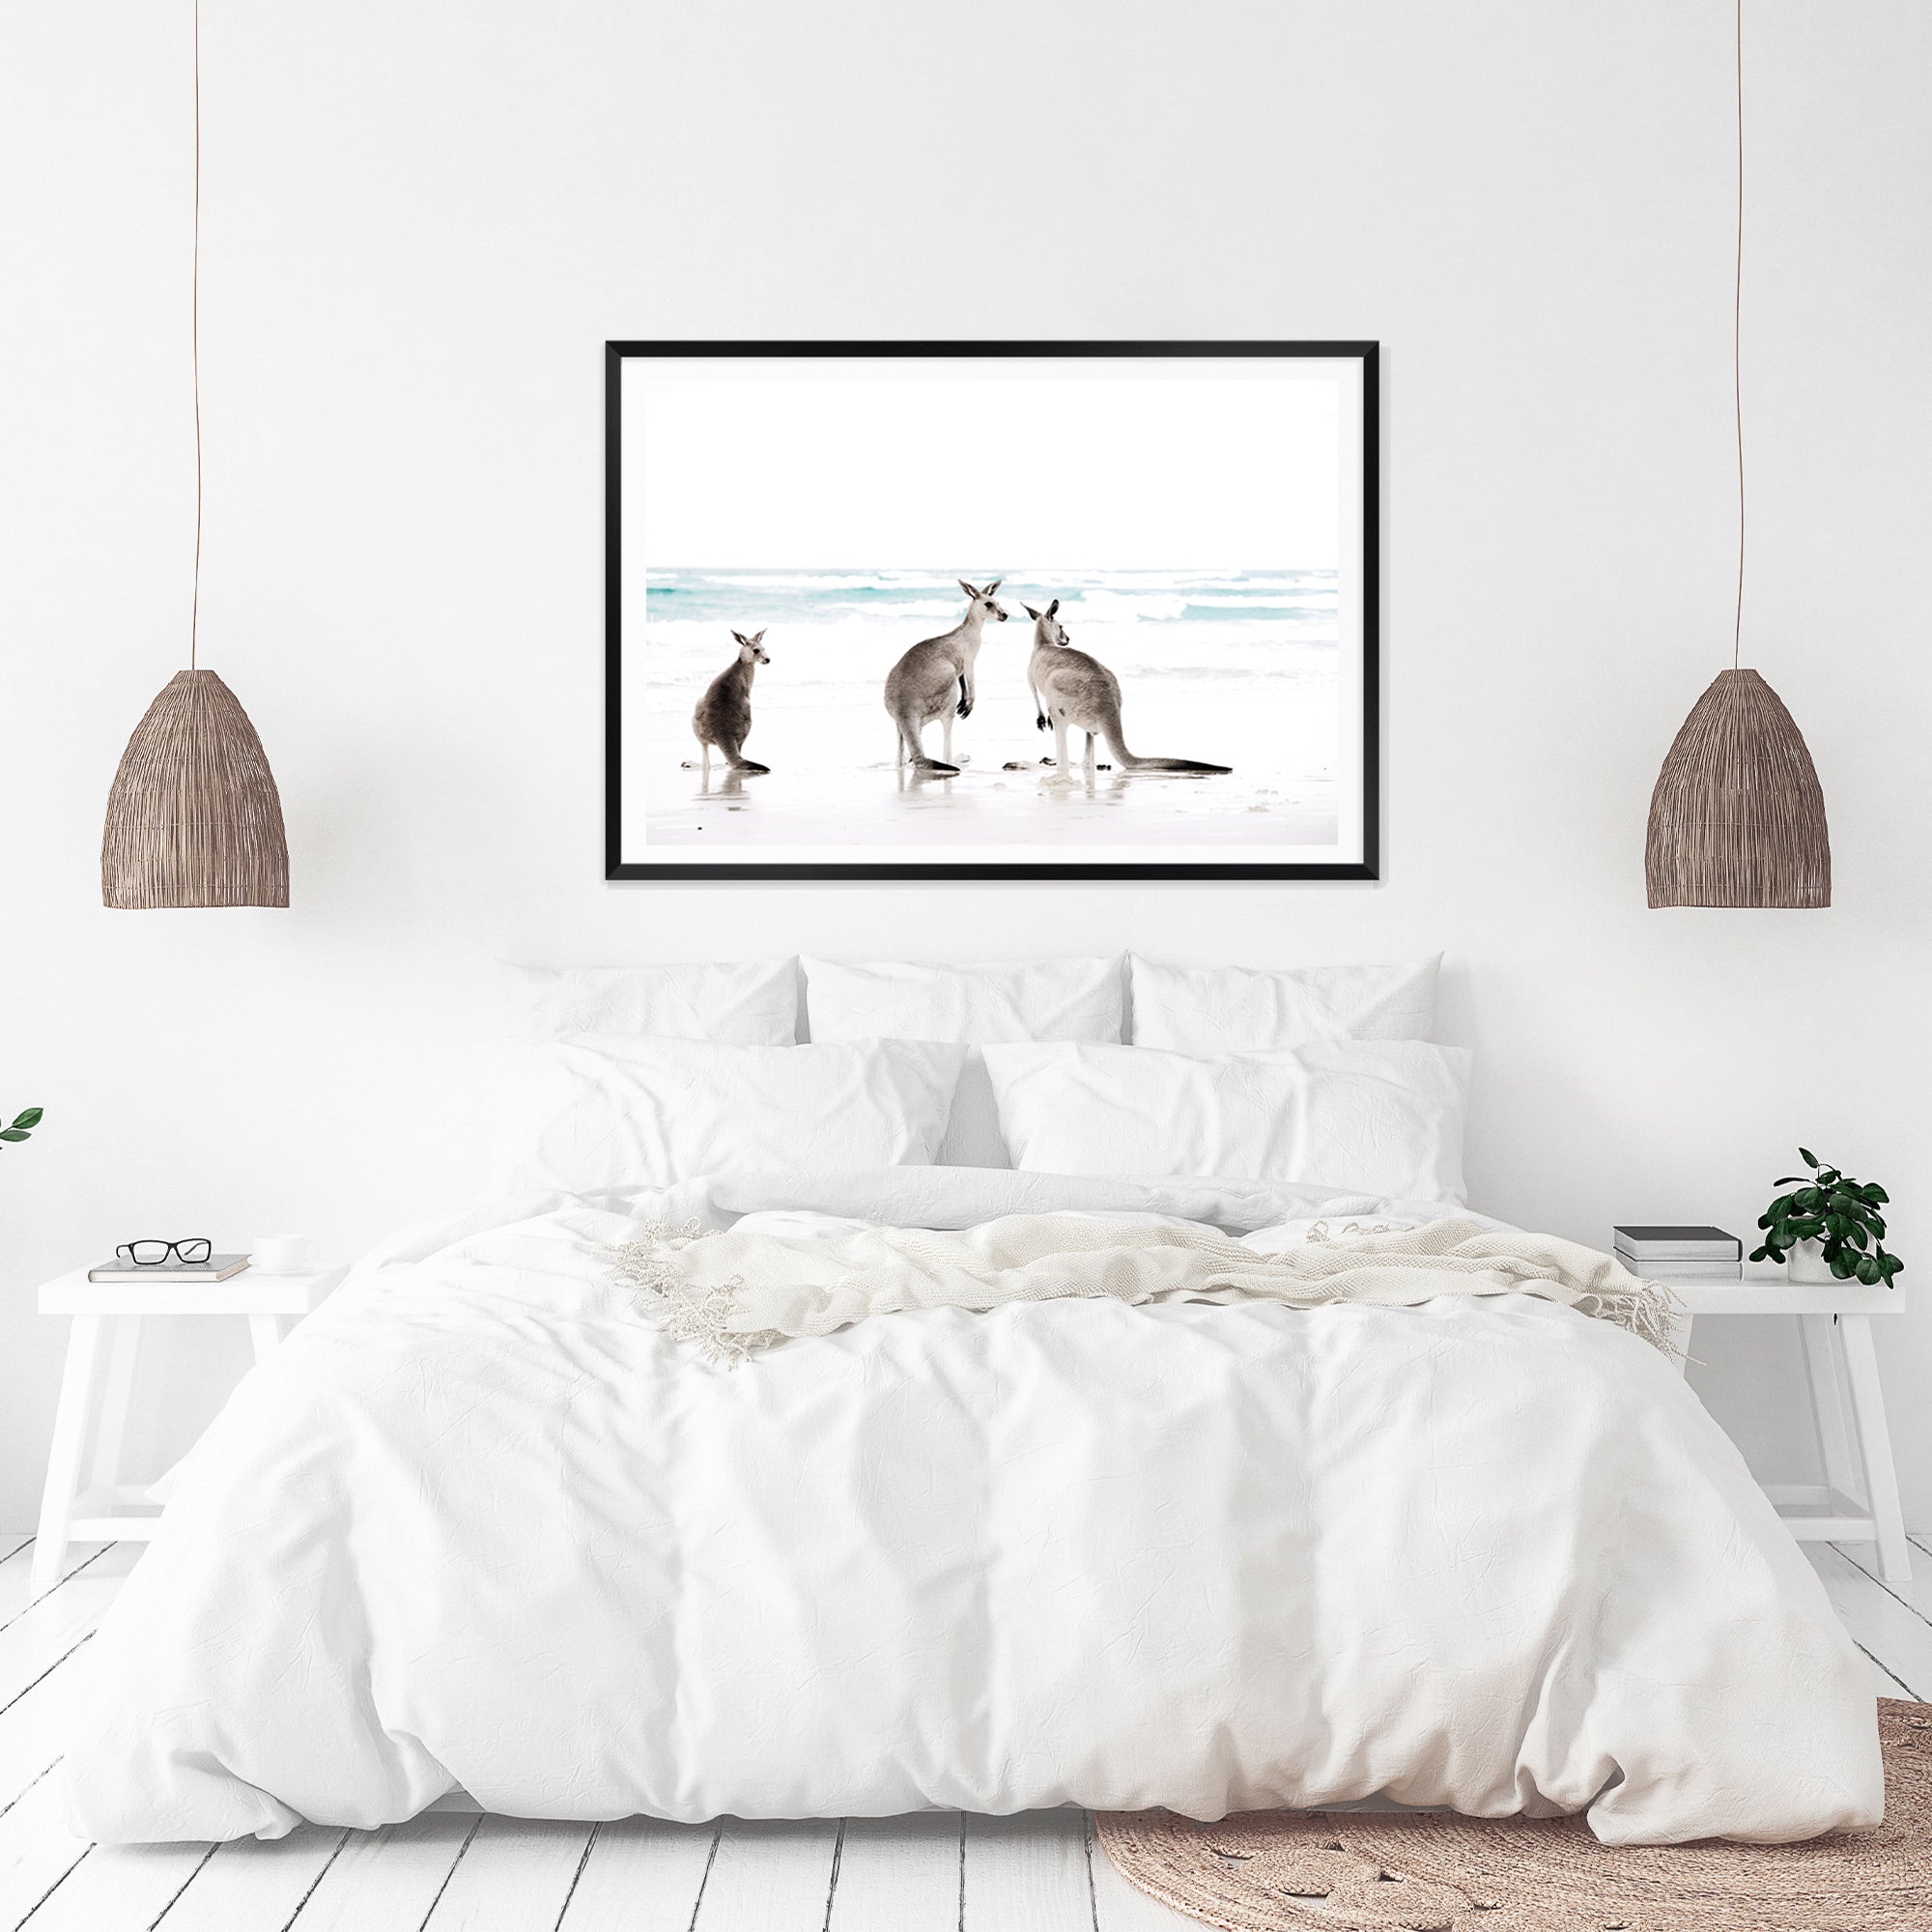 A framed or unframed coastal art print of three kangaroos enjoying some time on the beach, available in natural timber, black or white frames.